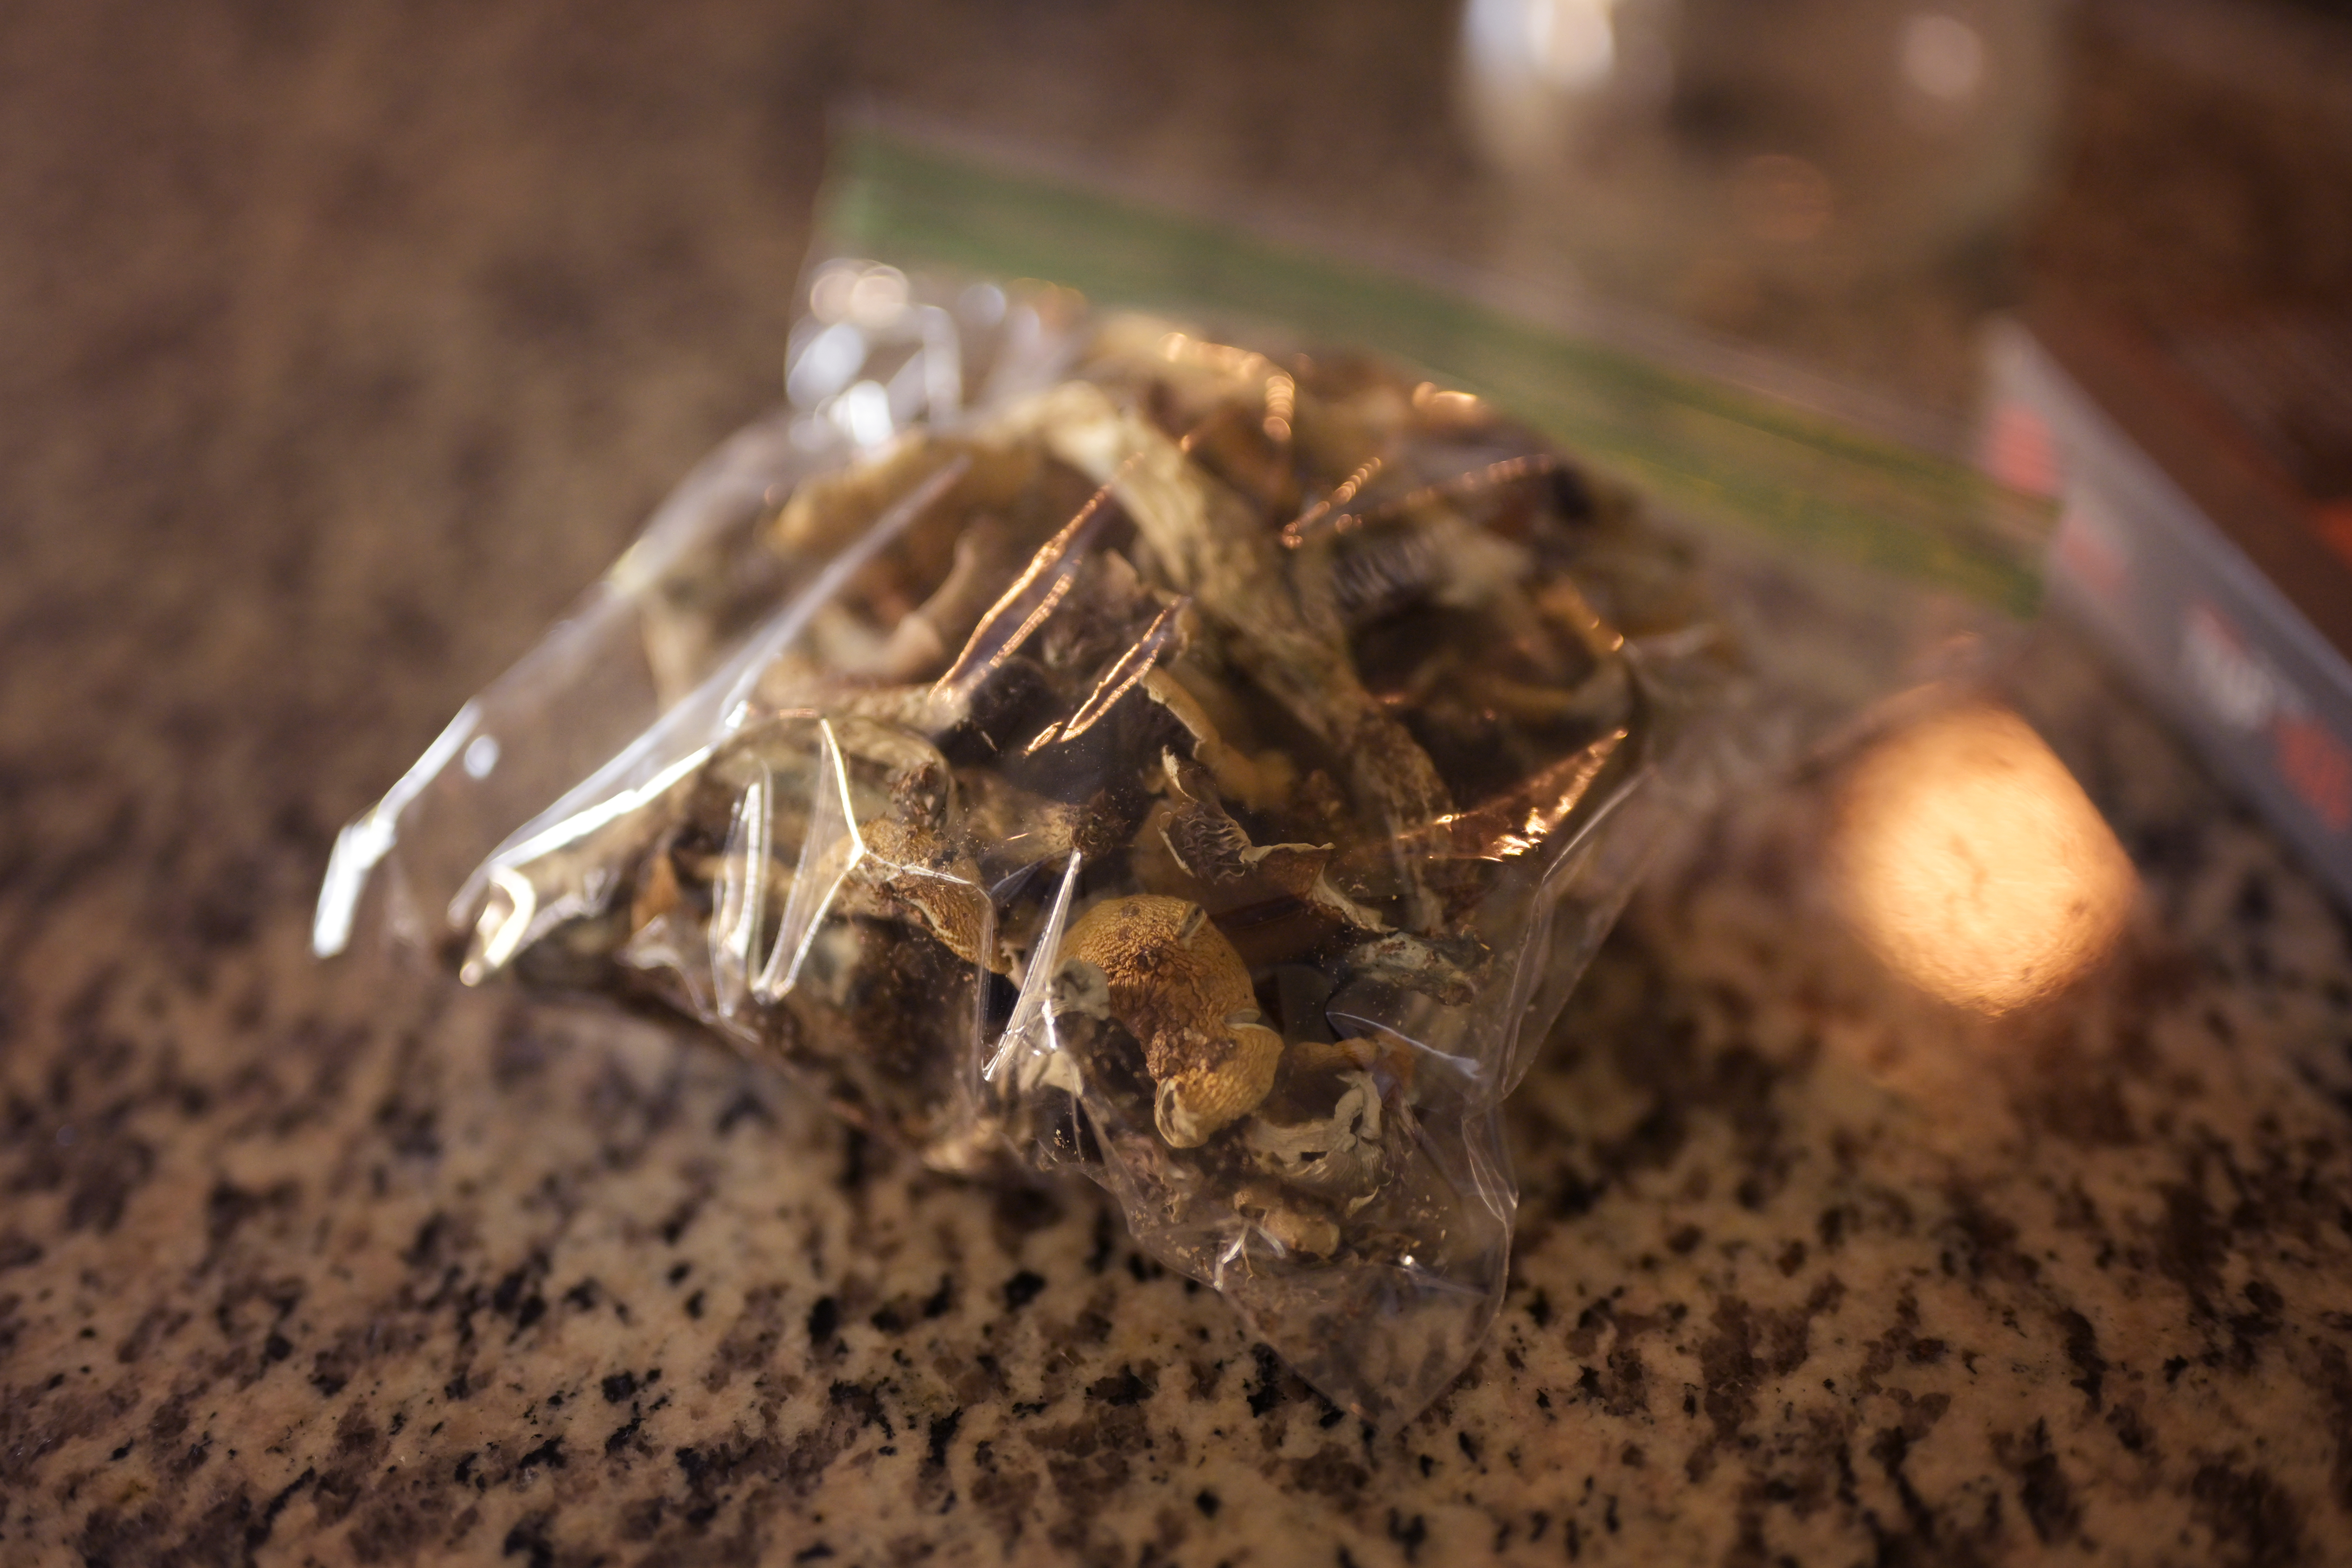 Psilocybin mushrooms, which are being used for therapeutic treatment in some countries. (Photo: Getty Images)